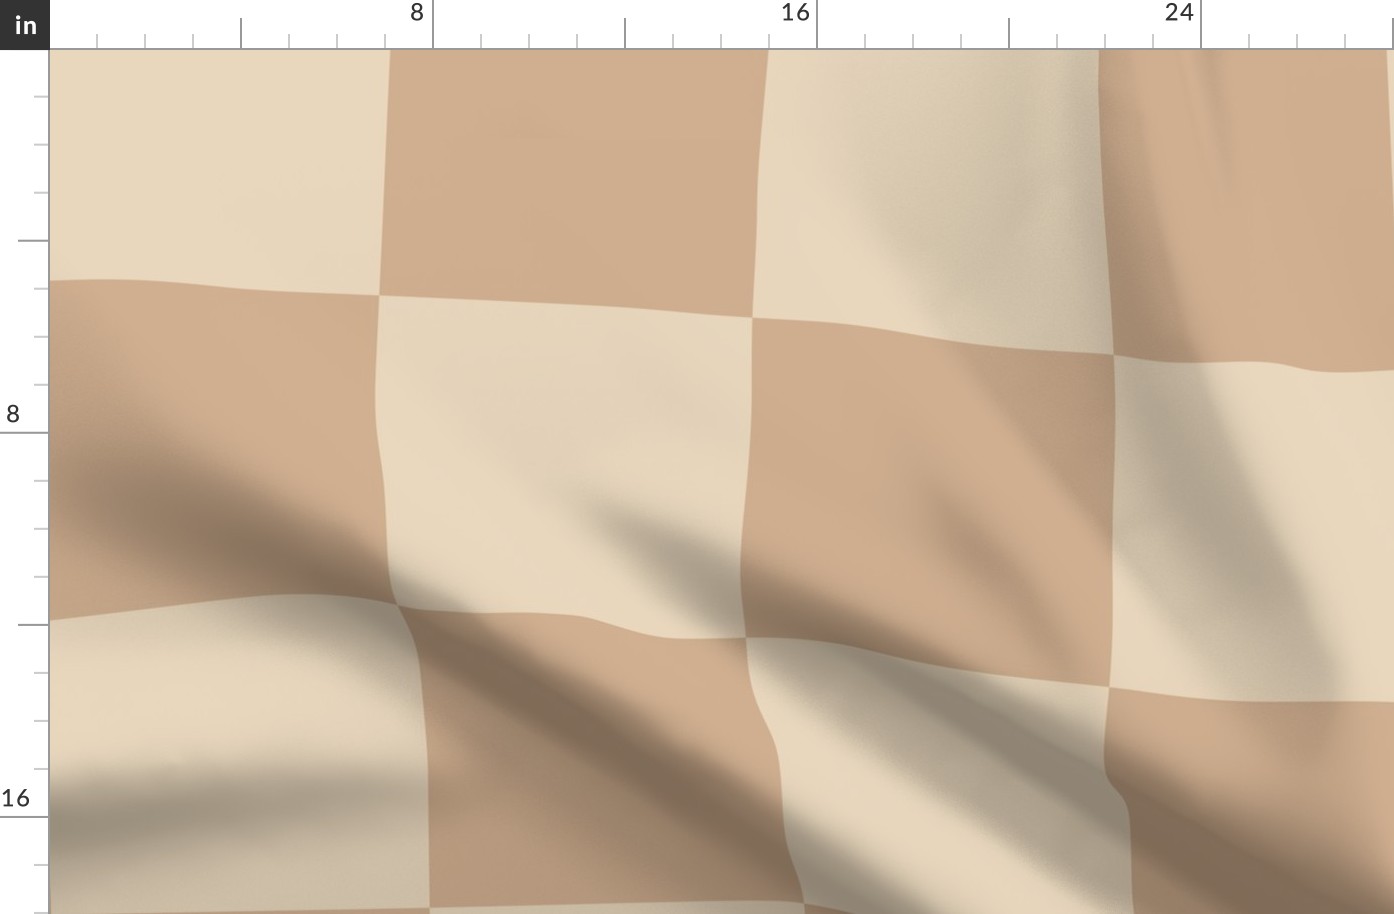 JP19 - Cheater Quilt Checkerboard  in Seven Inch Squares of Warm Beige and Almond